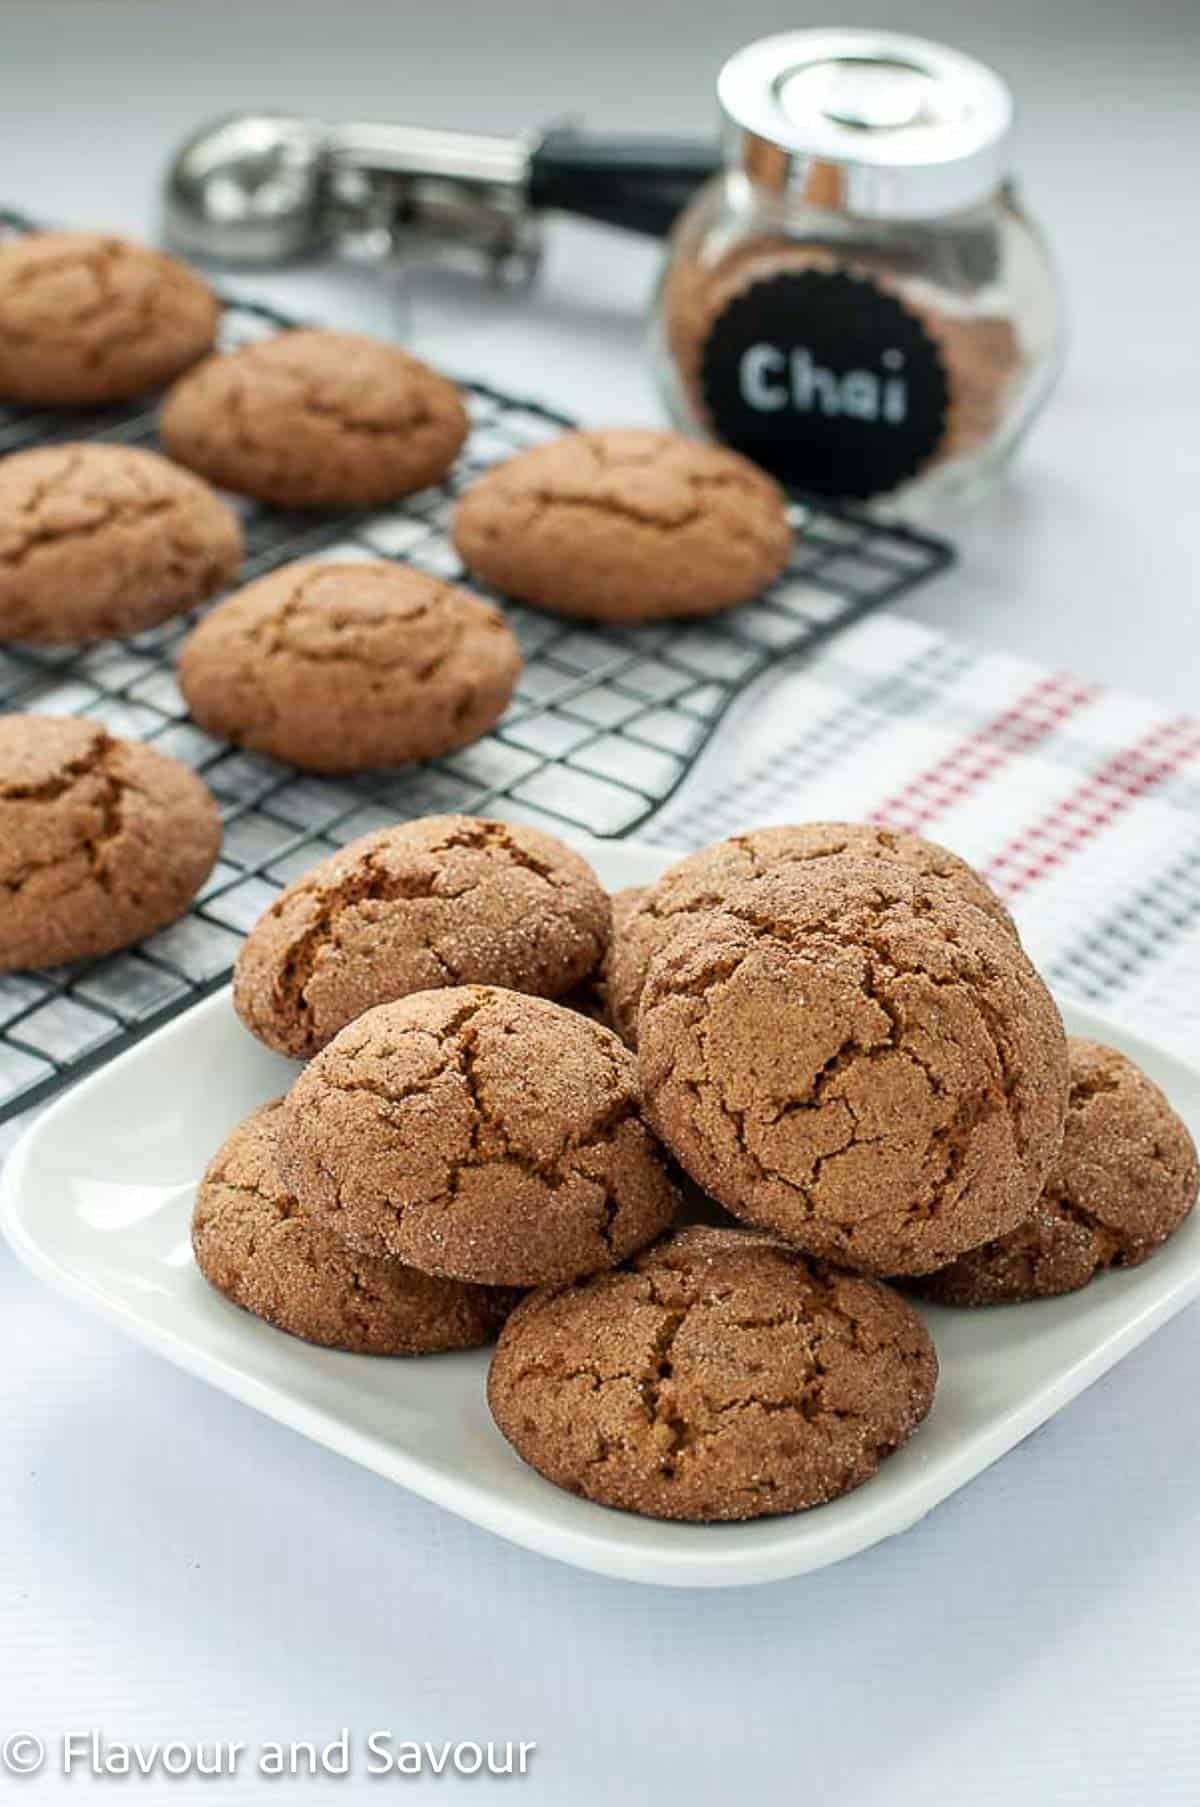 A plate full of chai-spiced gluten-free snickerdoodles with more on a cooling rack in the background.